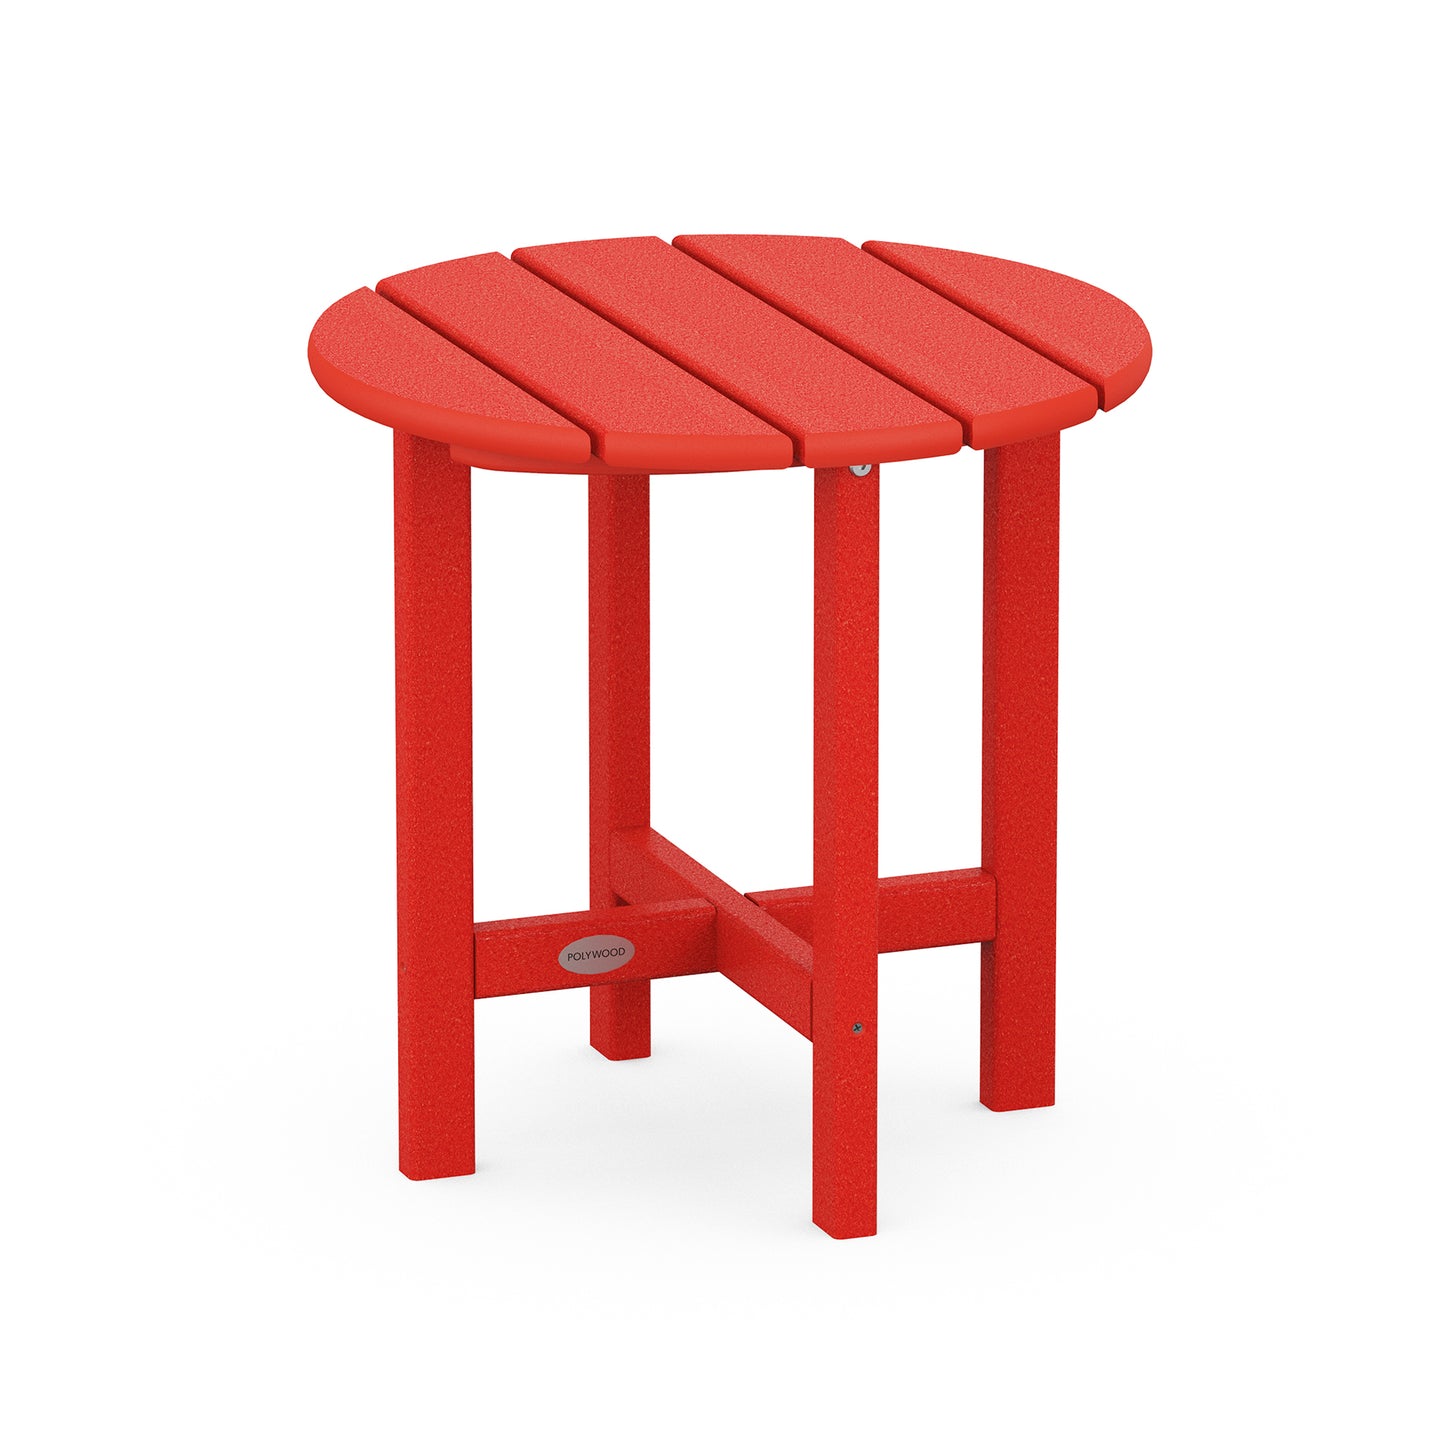 A small red POLYWOOD® 18" Round Side Table with a slatted round top and sturdy legs, isolated on a white background.